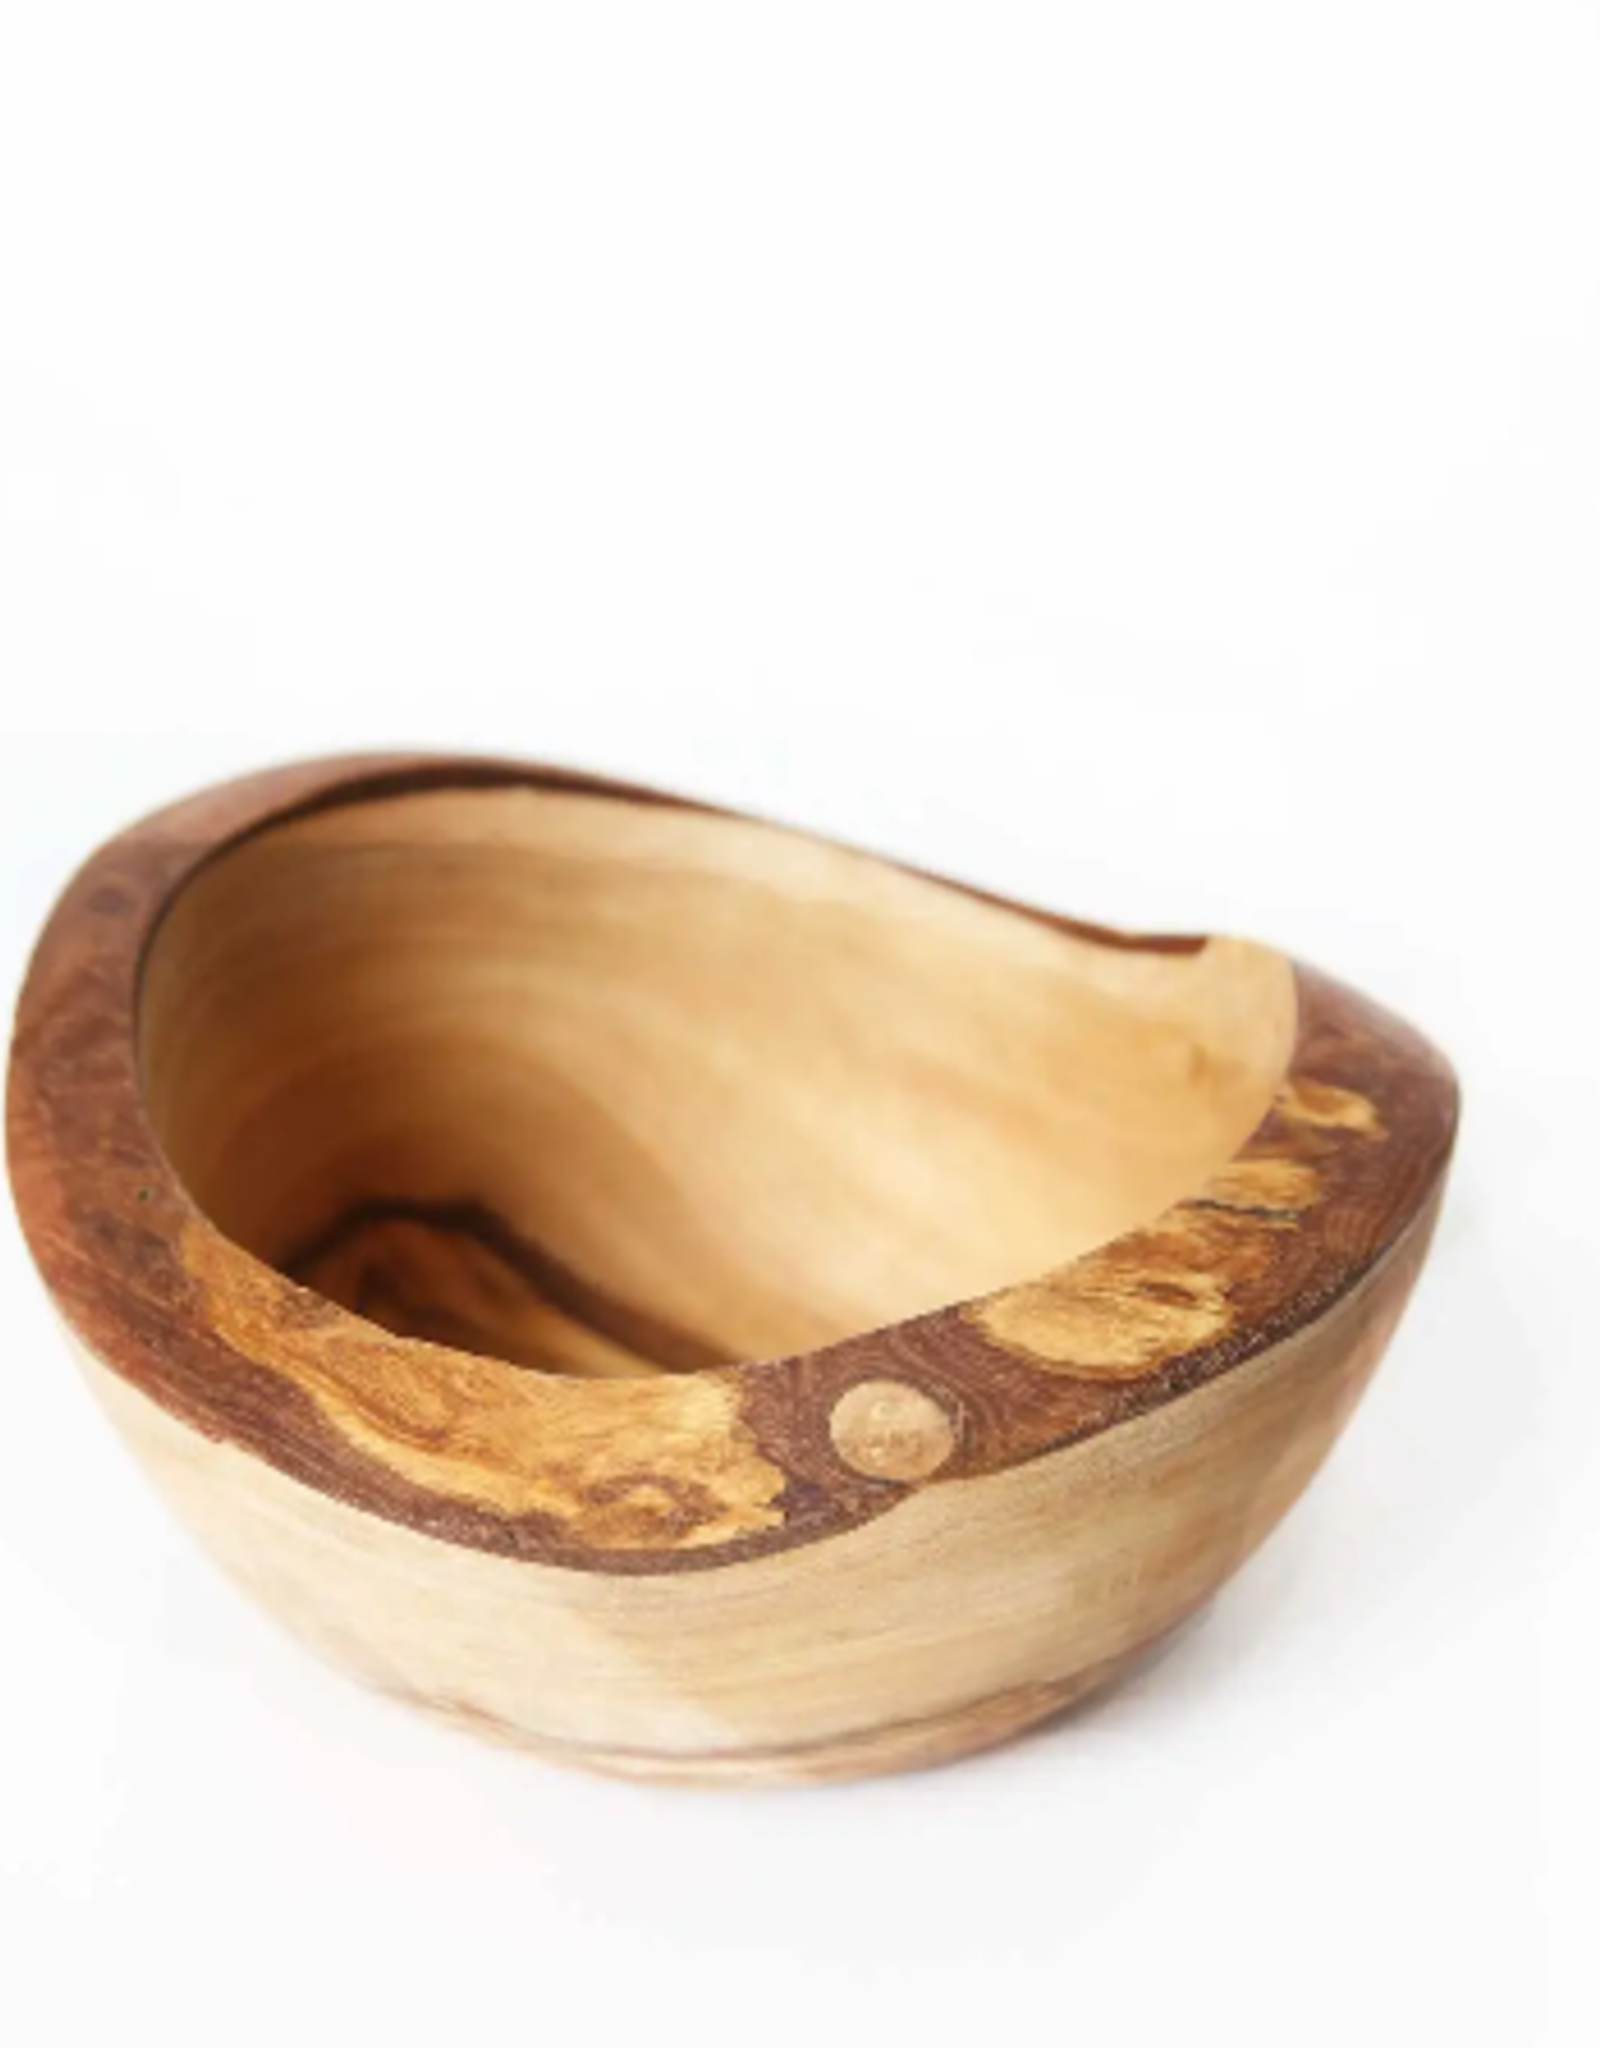 Bowl Olive Wood Rustic 5.5 Inches Small